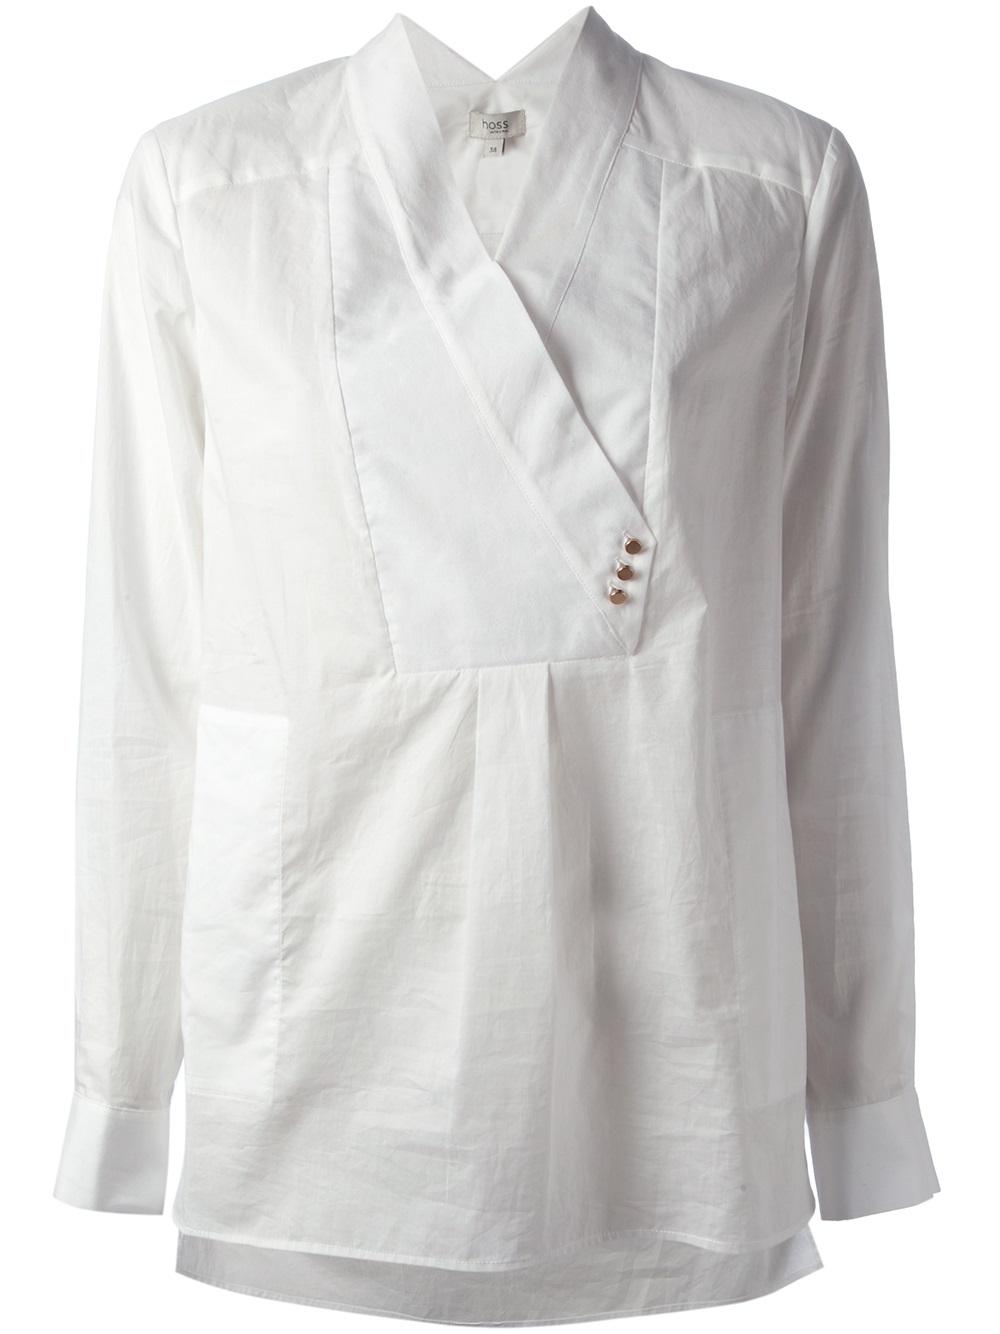 Lyst - Intropia Cross Over Blouse in White